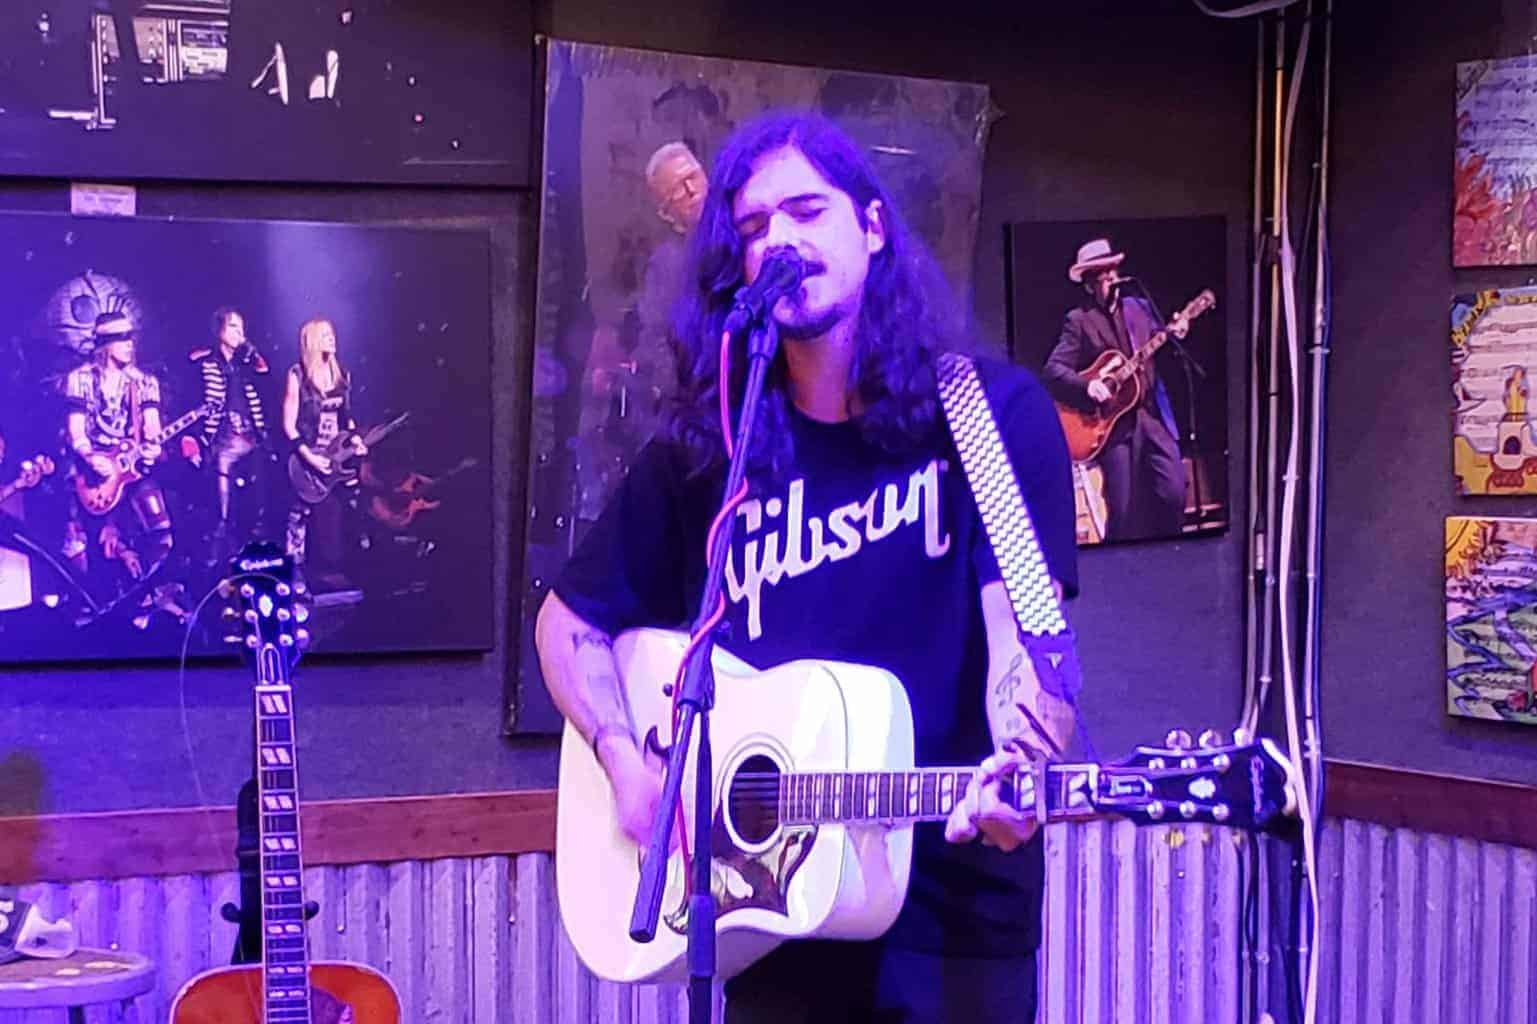 Dominic DeLaney at Mathews Brewing Co.